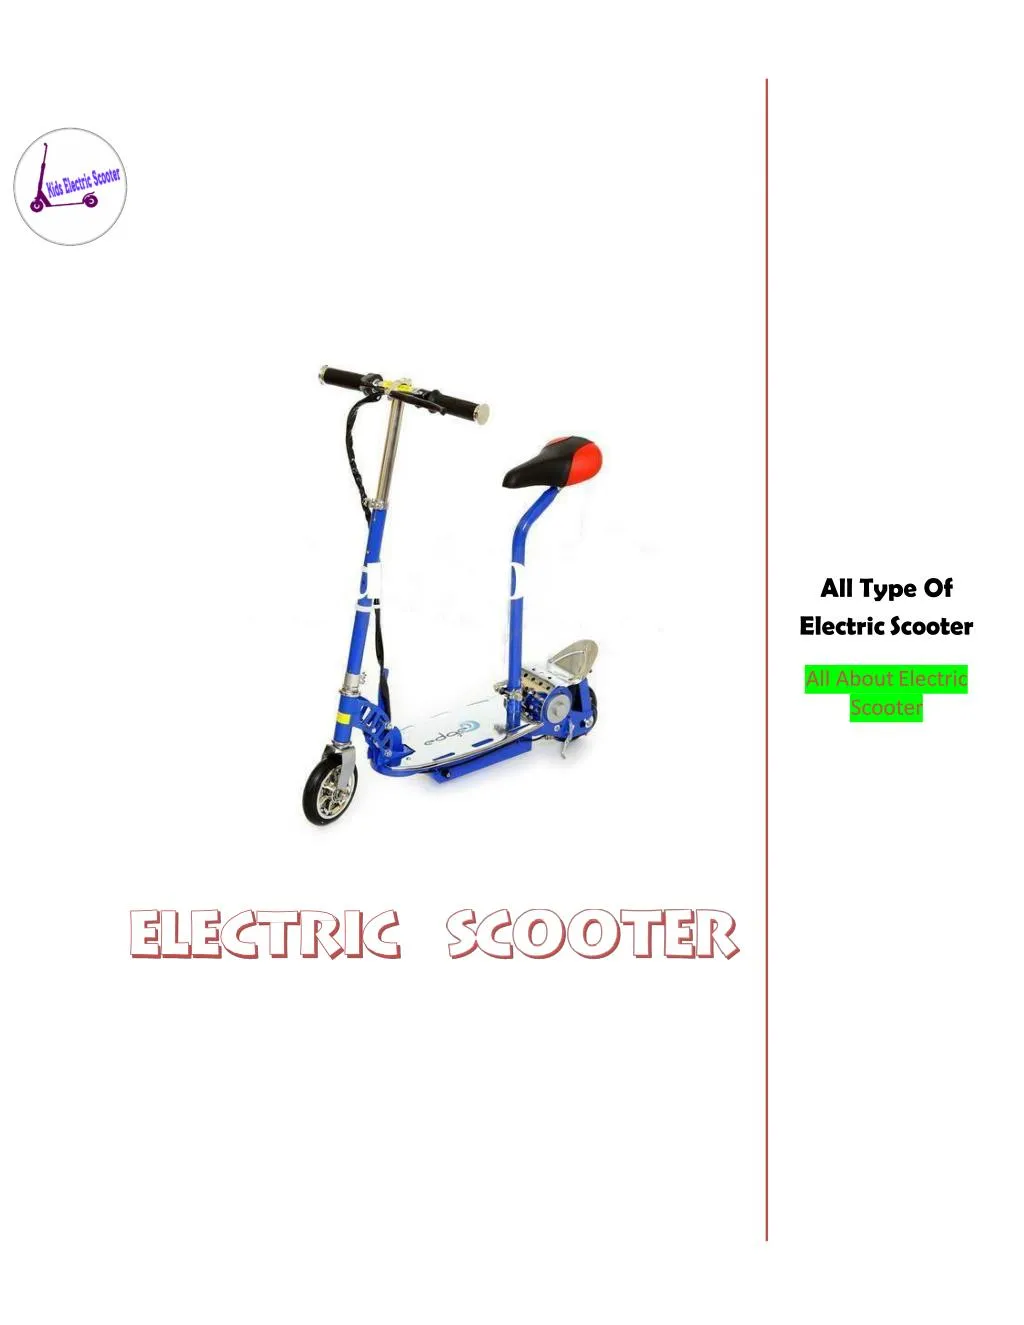 all type of electric scooter all about electric n.